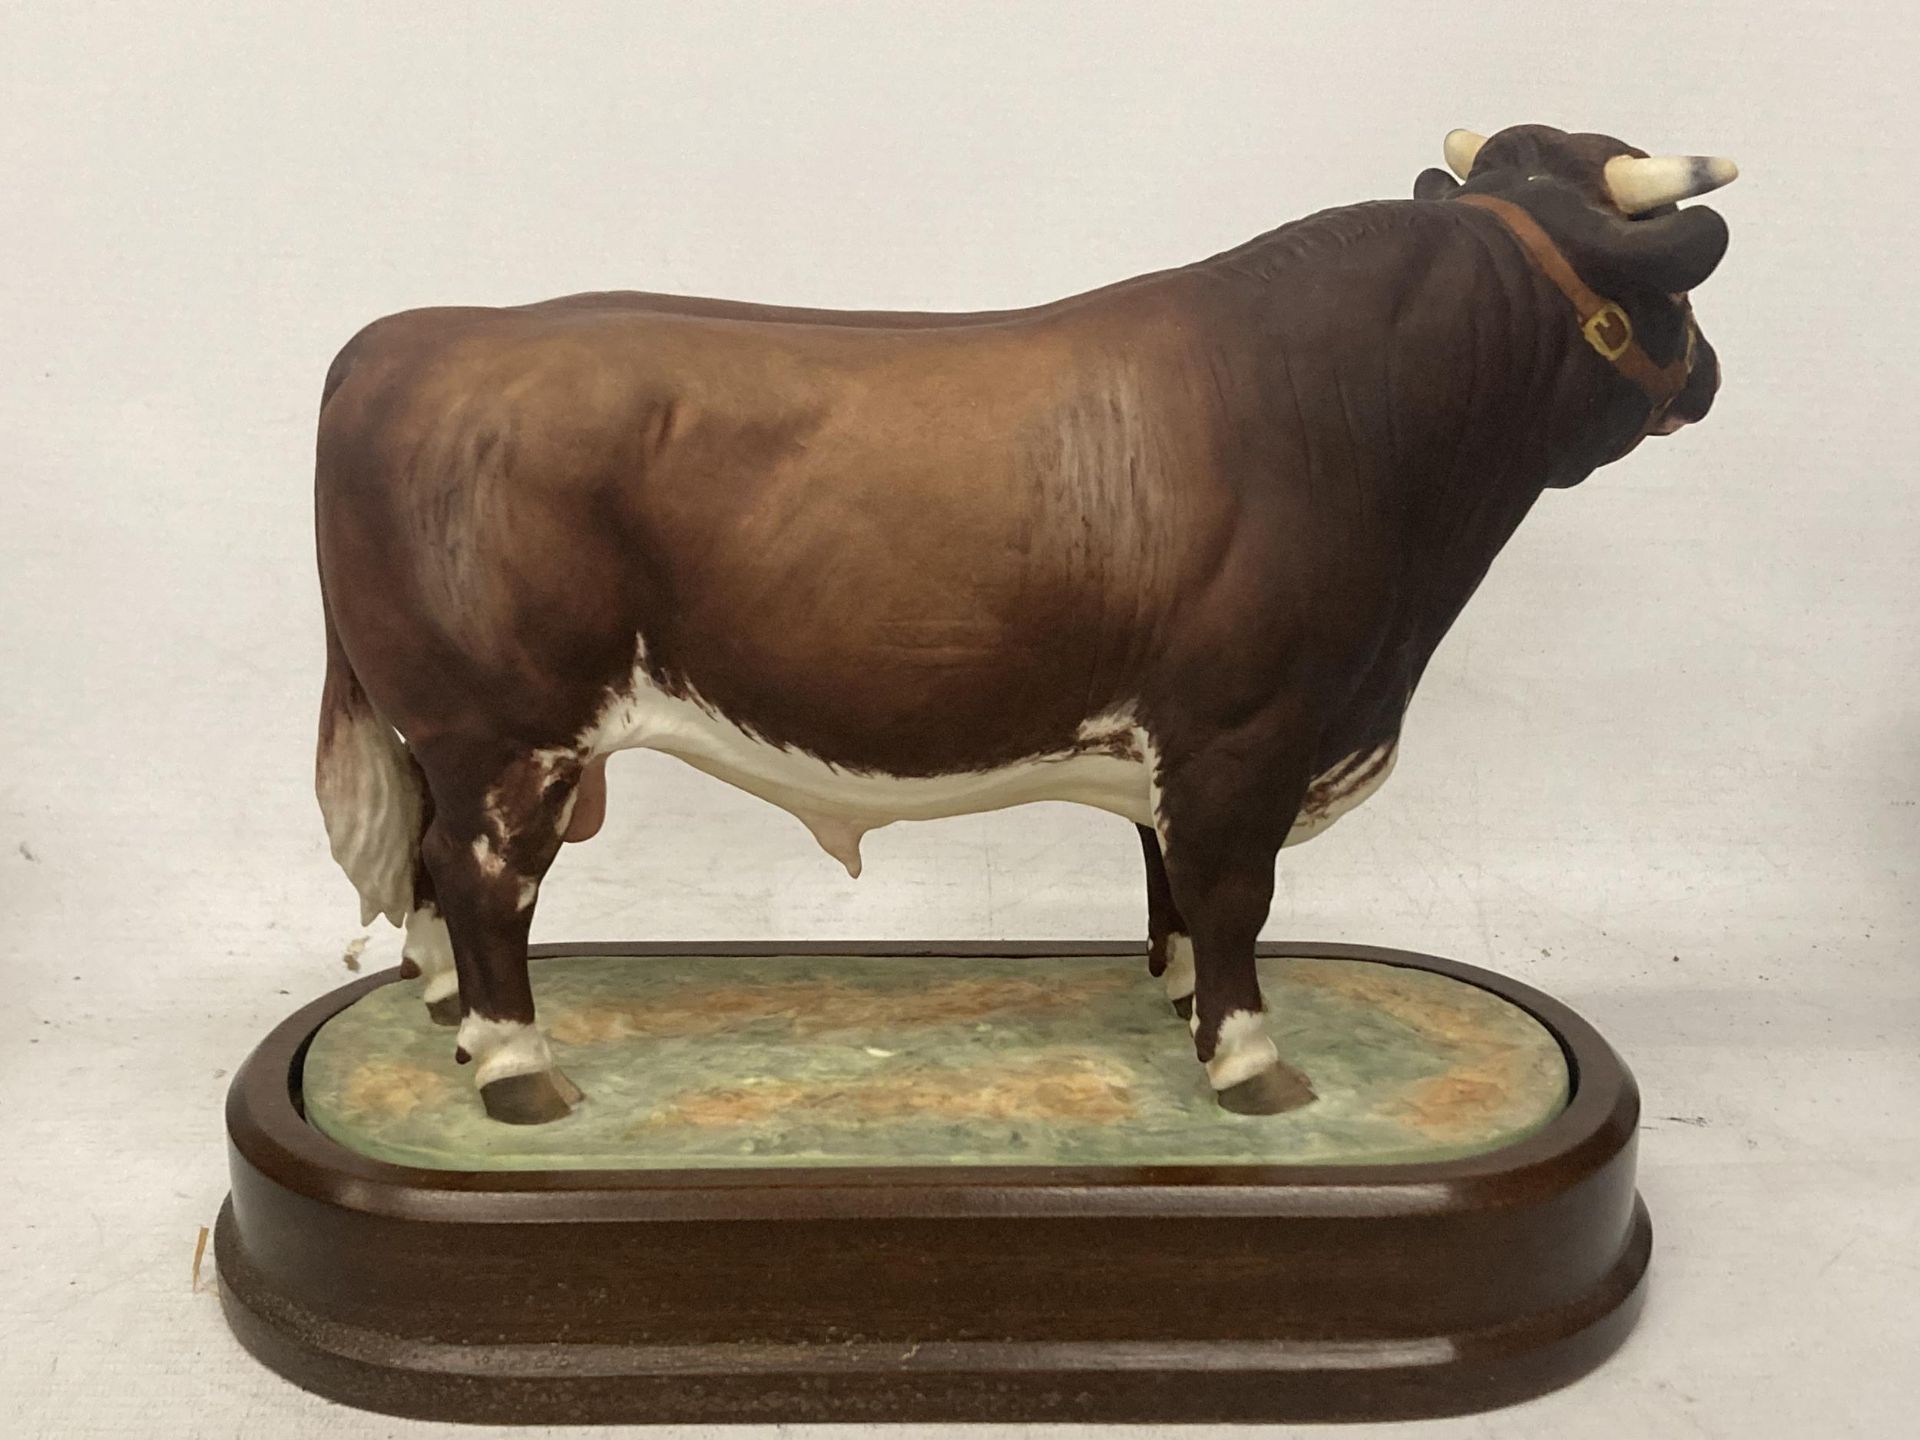 A ROYAL WORCESTER MODEL OF A DAIRY SHORTHORN BULL MODELLED BY DORIS LINDNER PRODUCED IN A LIMITED - Image 3 of 5